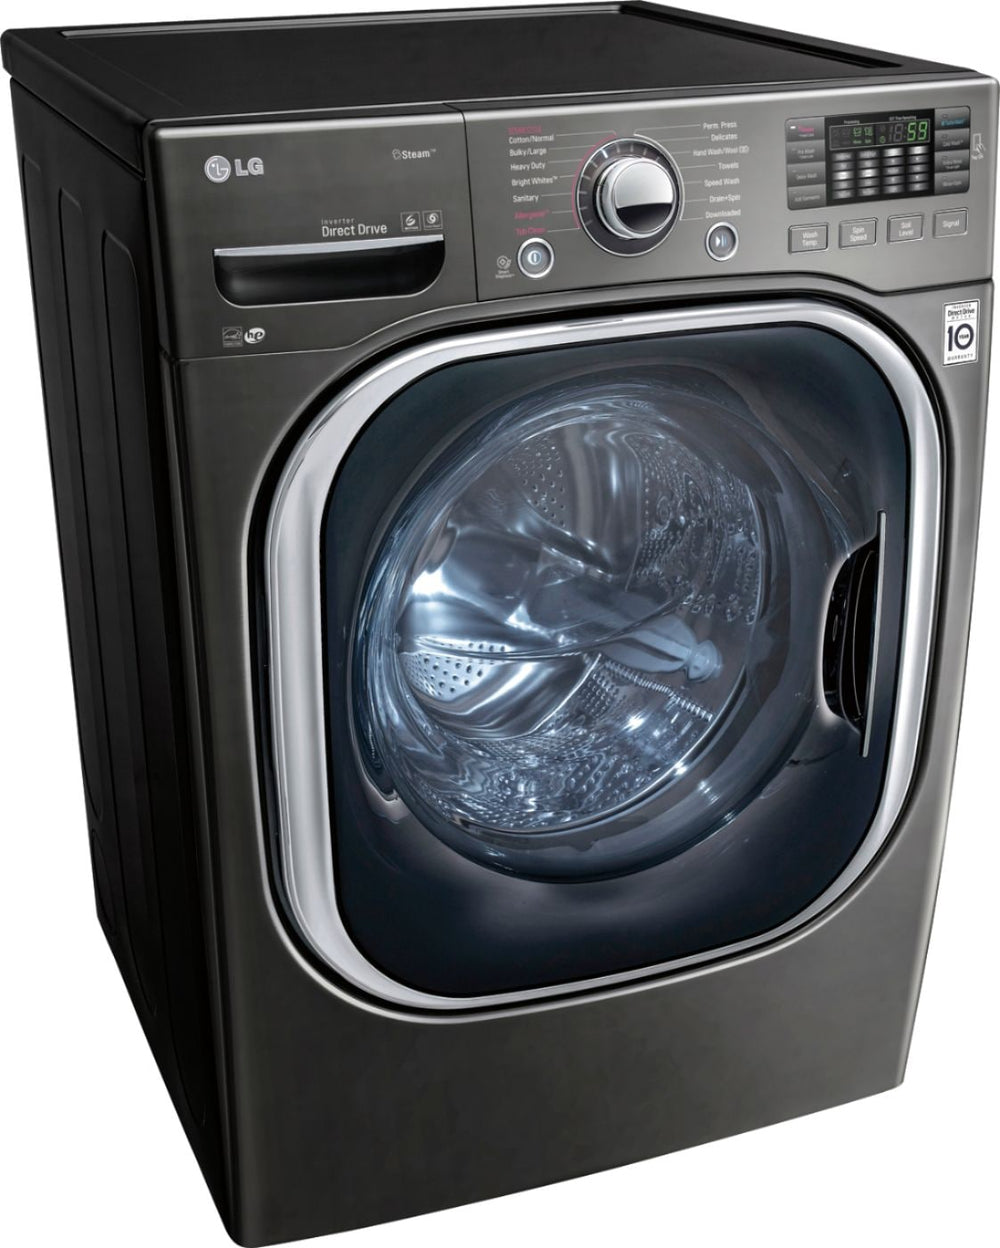 LG - 4.5 Cu. Ft. High Efficiency Stackable Front-Load Washer with Steam and TurboWash Technology - Black stainless steel_1